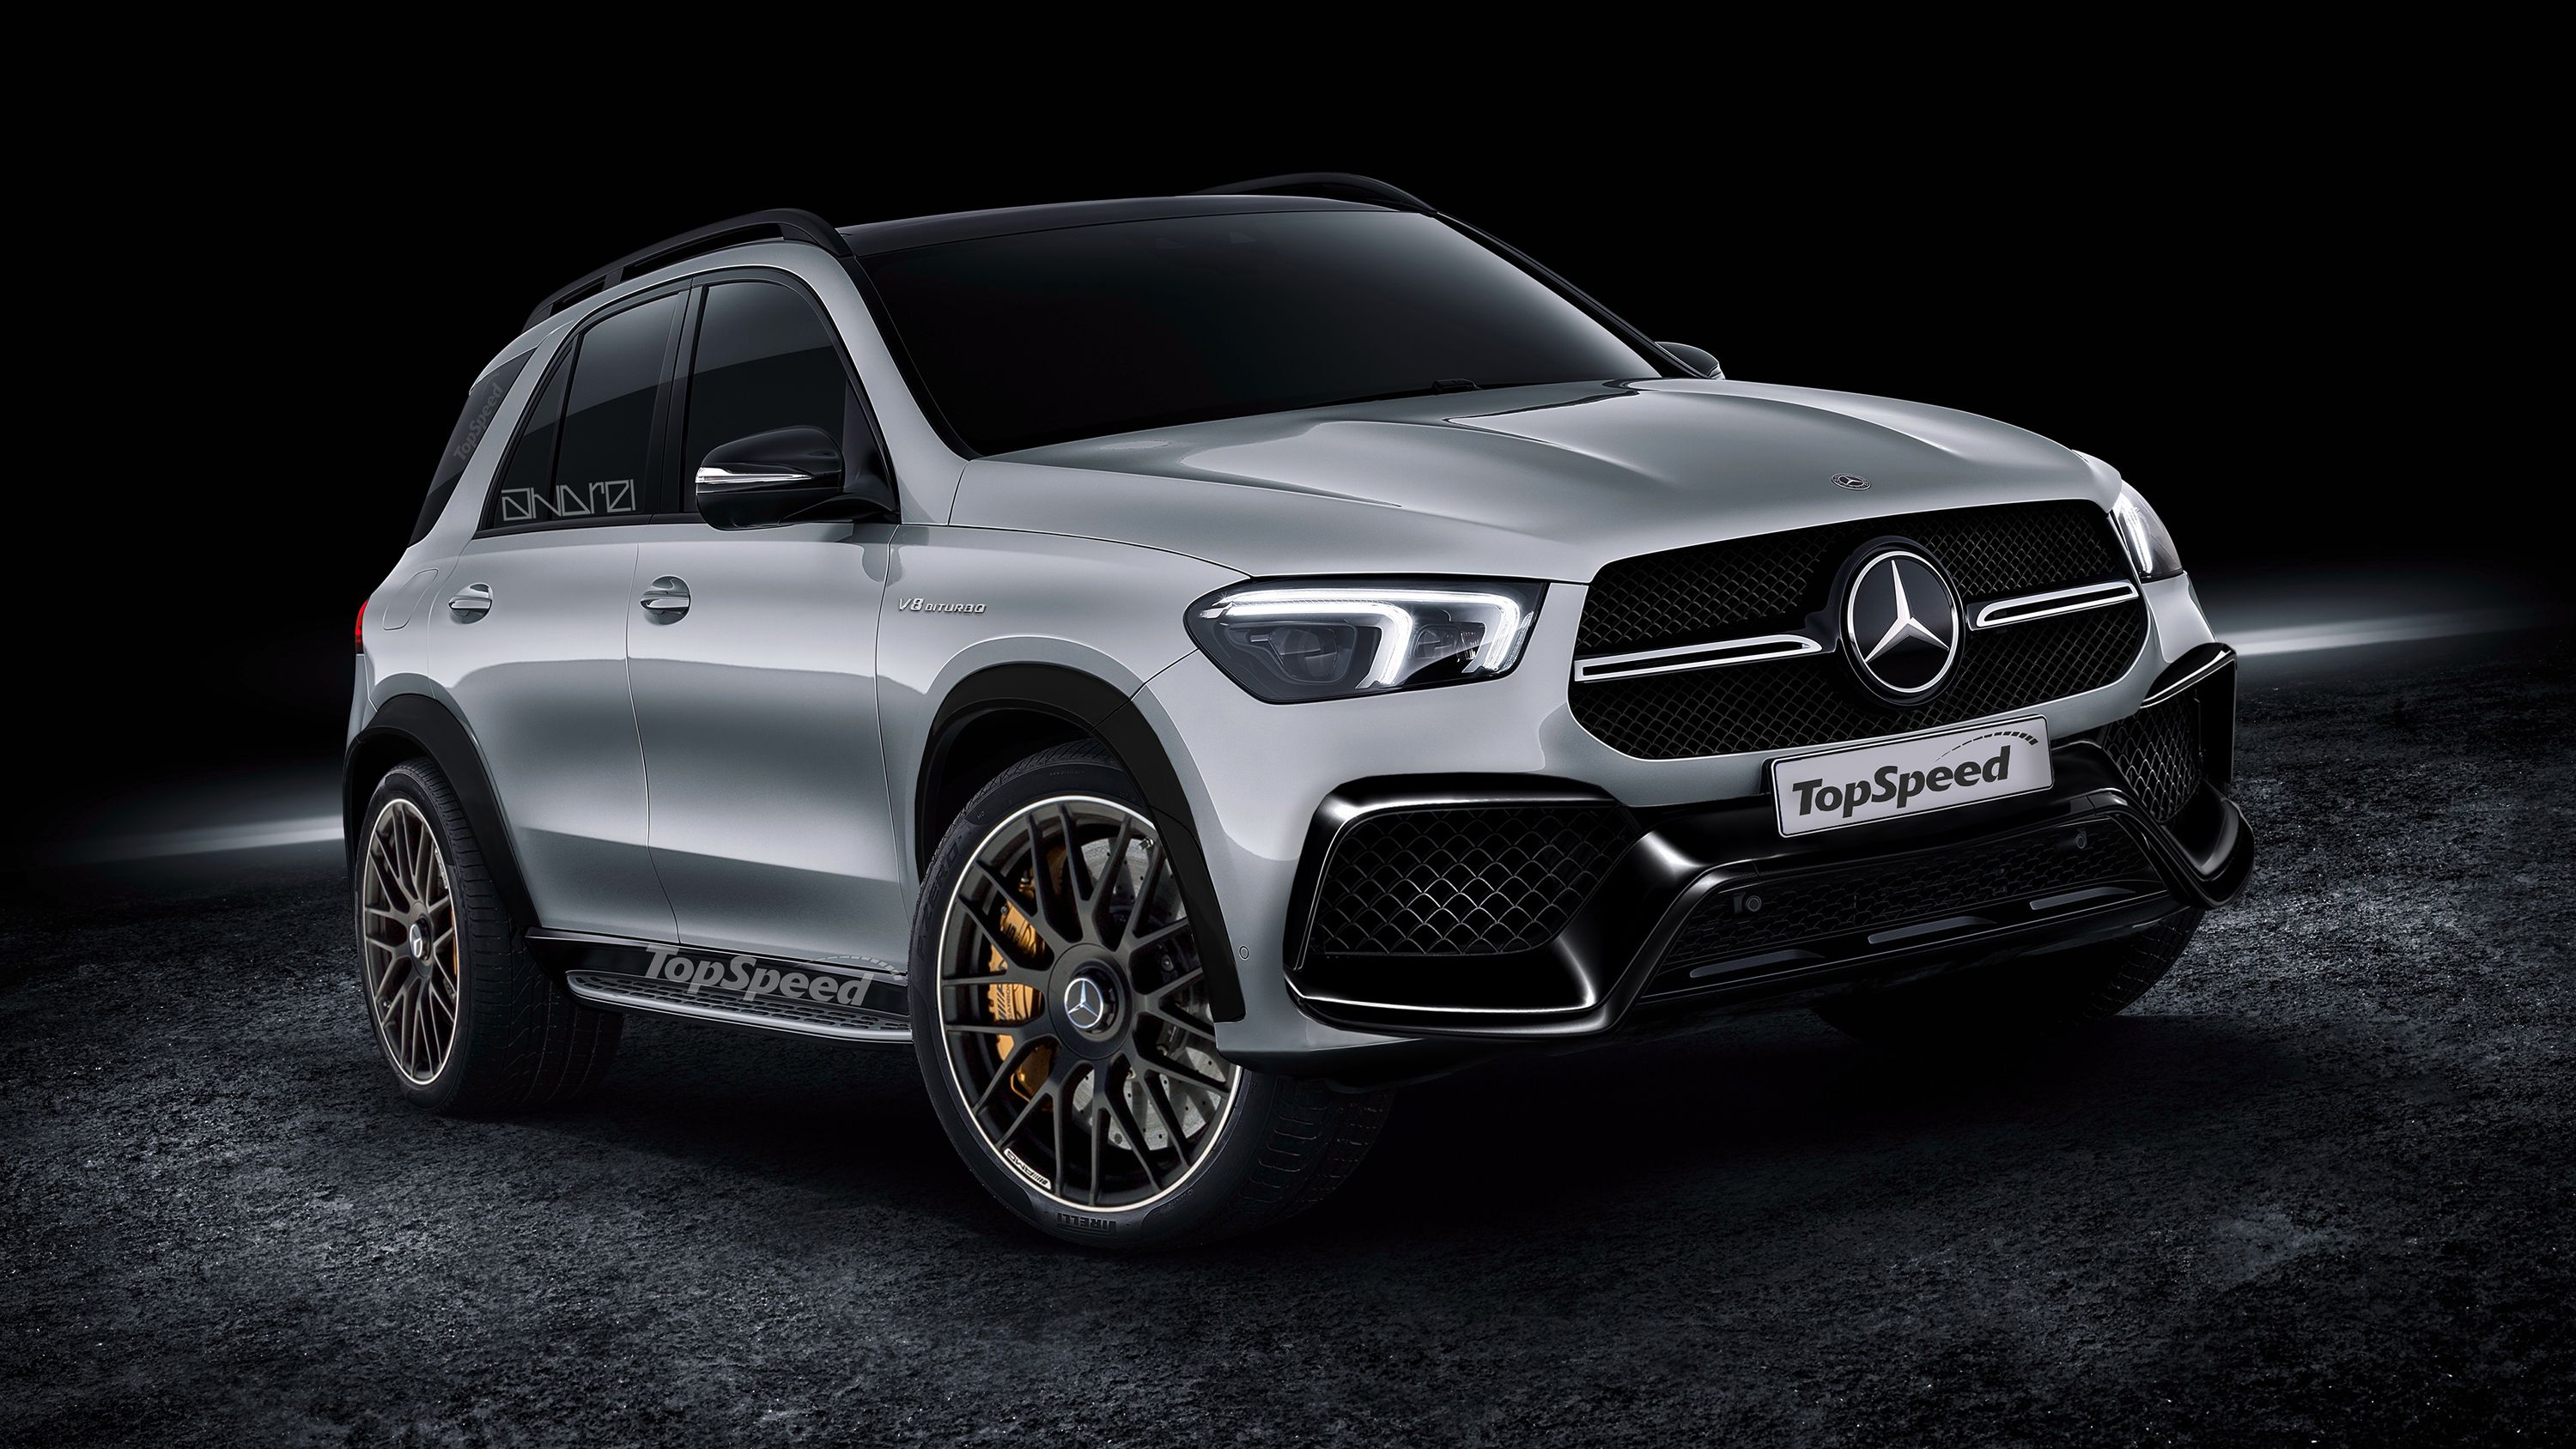 2018 Did We Nail This Rendering of the 2020 Mercedes-AMG GLE 63?